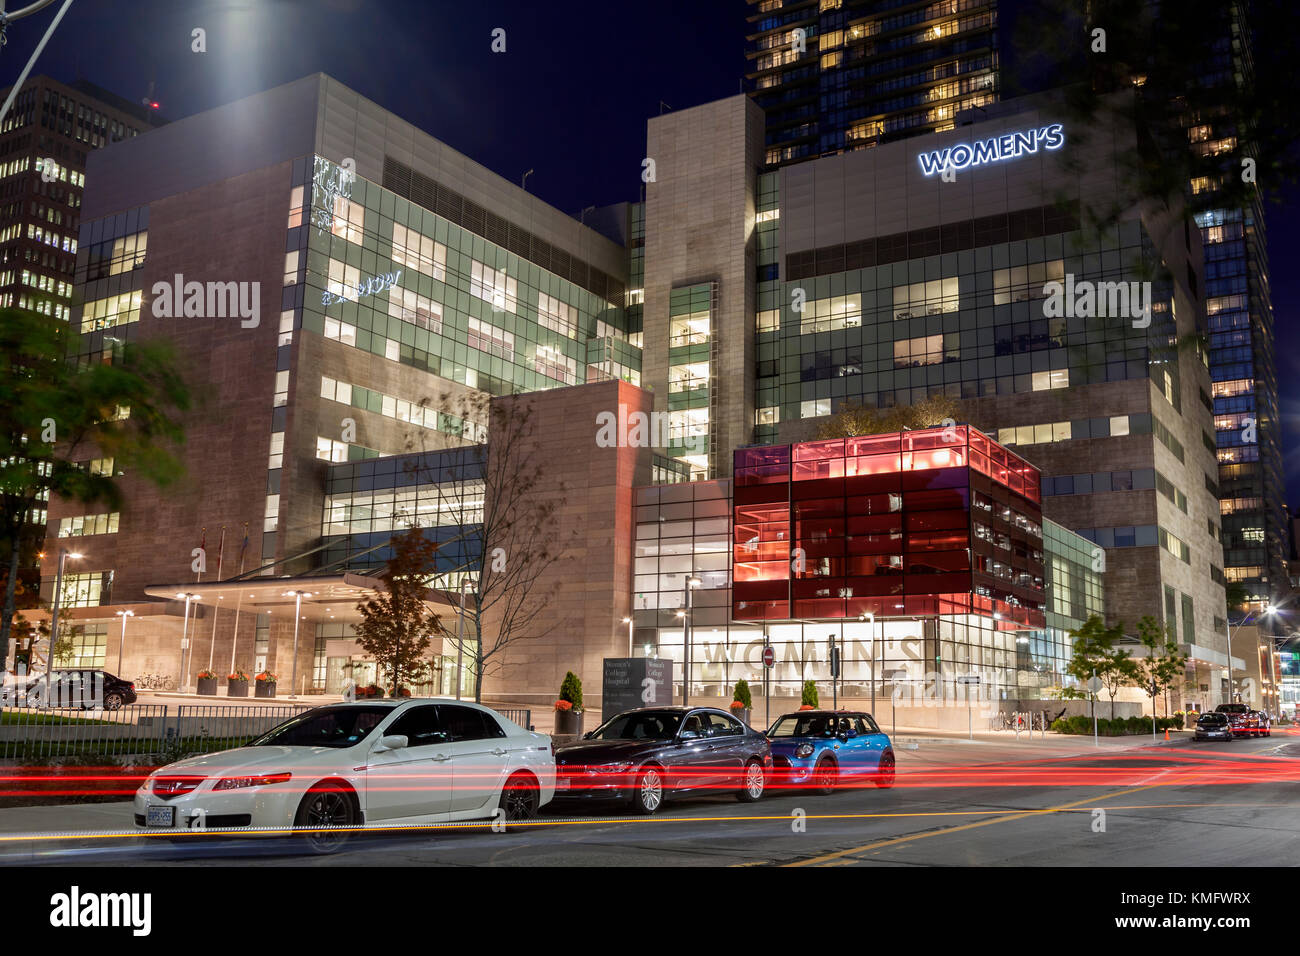 Toronto, Canada - Oct 19, 2017: The Women's College Hospital and medical centre in the city of Toronto at night. Province of Ontario, Canada Stock Photo